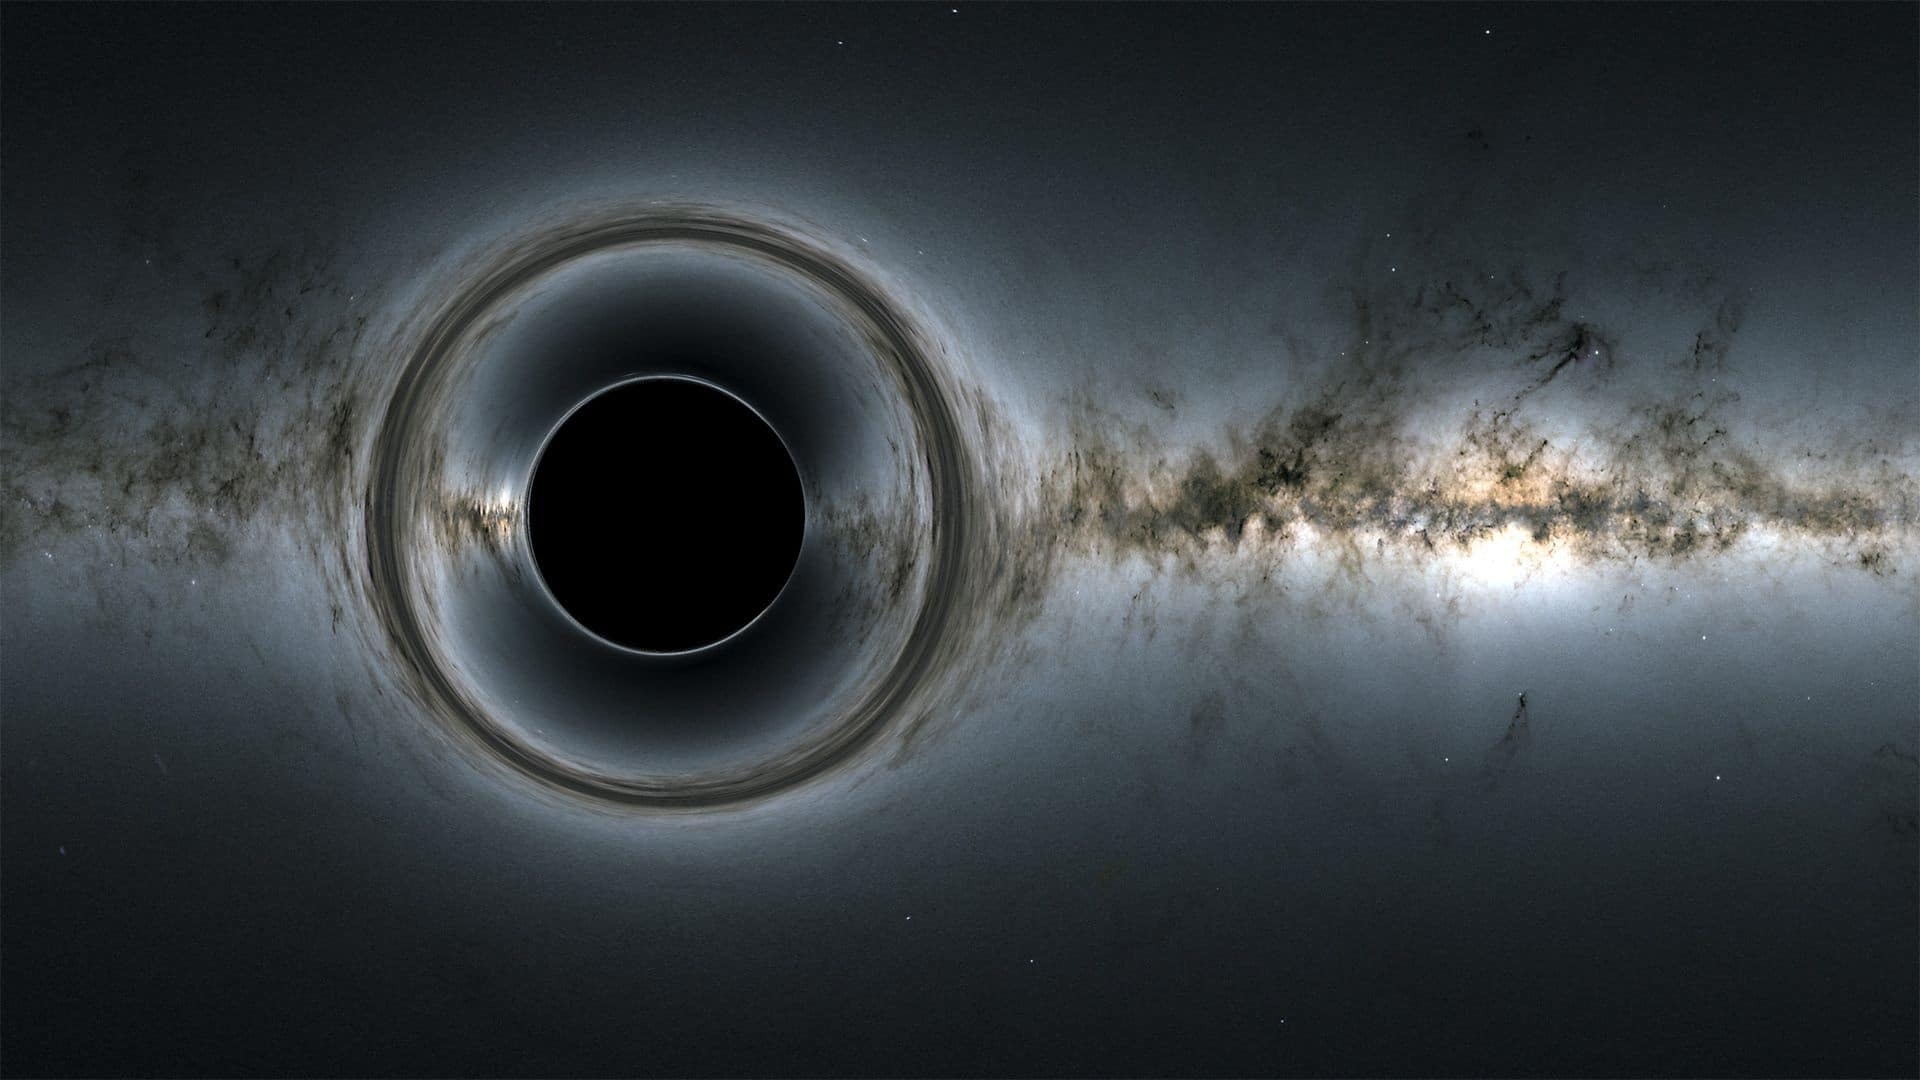 New formula for calculating Hawking radiation at the event horizon of a black hole